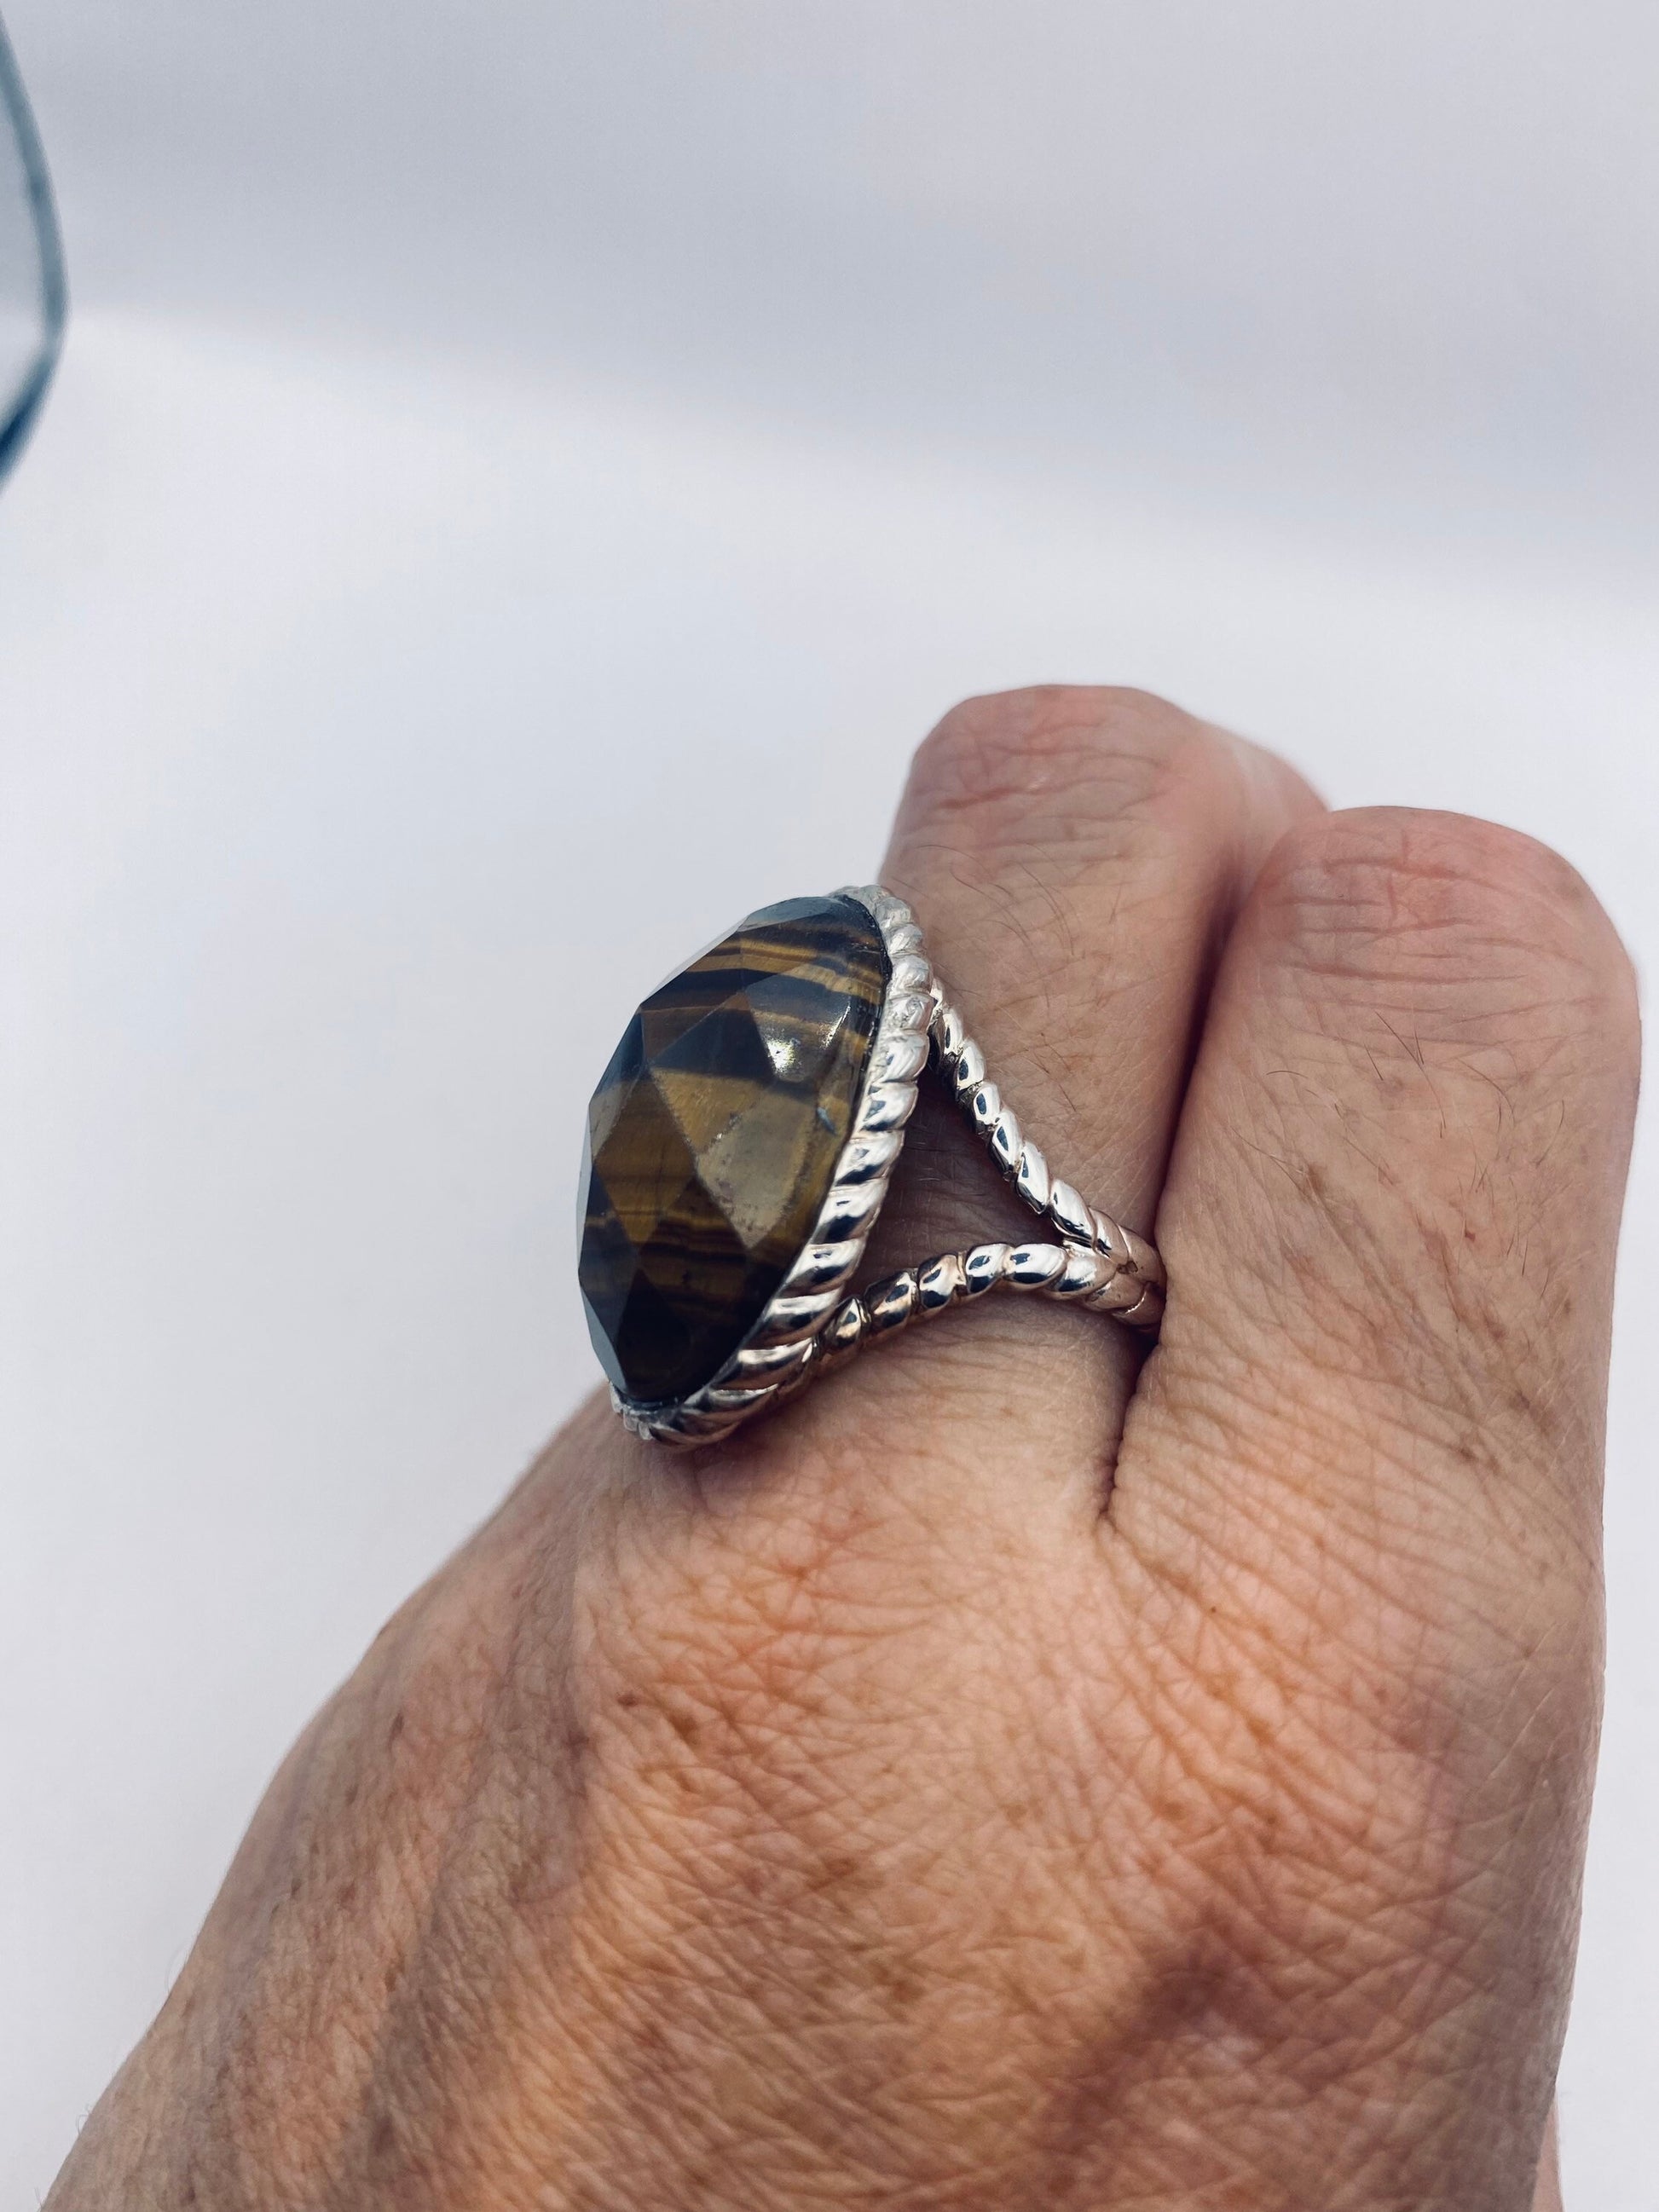 Vintage Tigers Eye Stone Sterling Silver 925 Ring